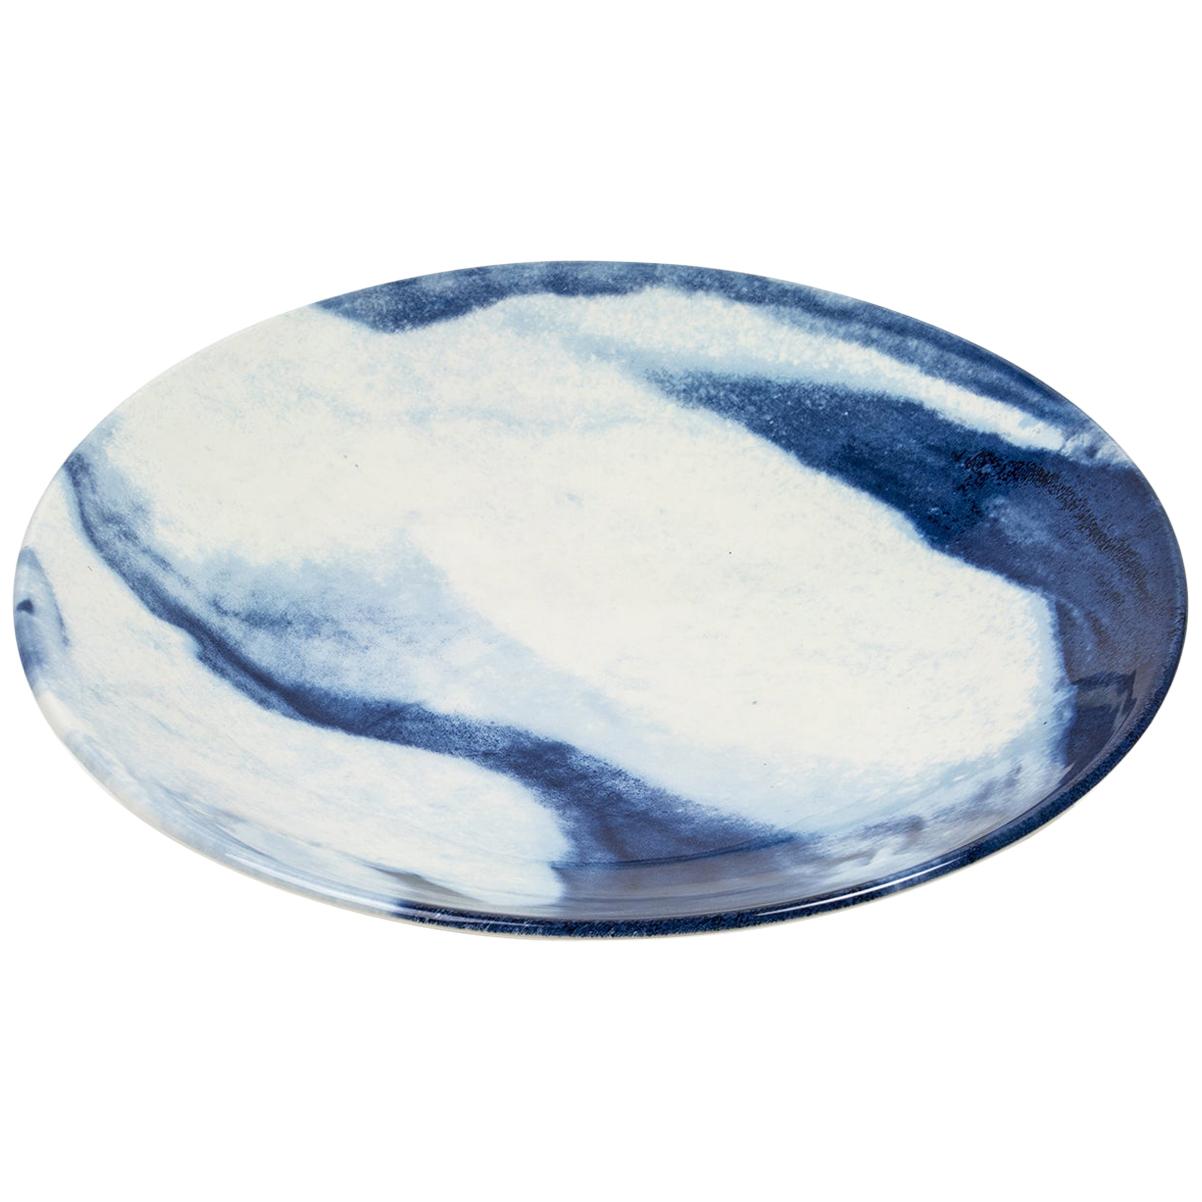 Contemporary Earthenware Large Bowl with Interpretation of Traditional Creamware